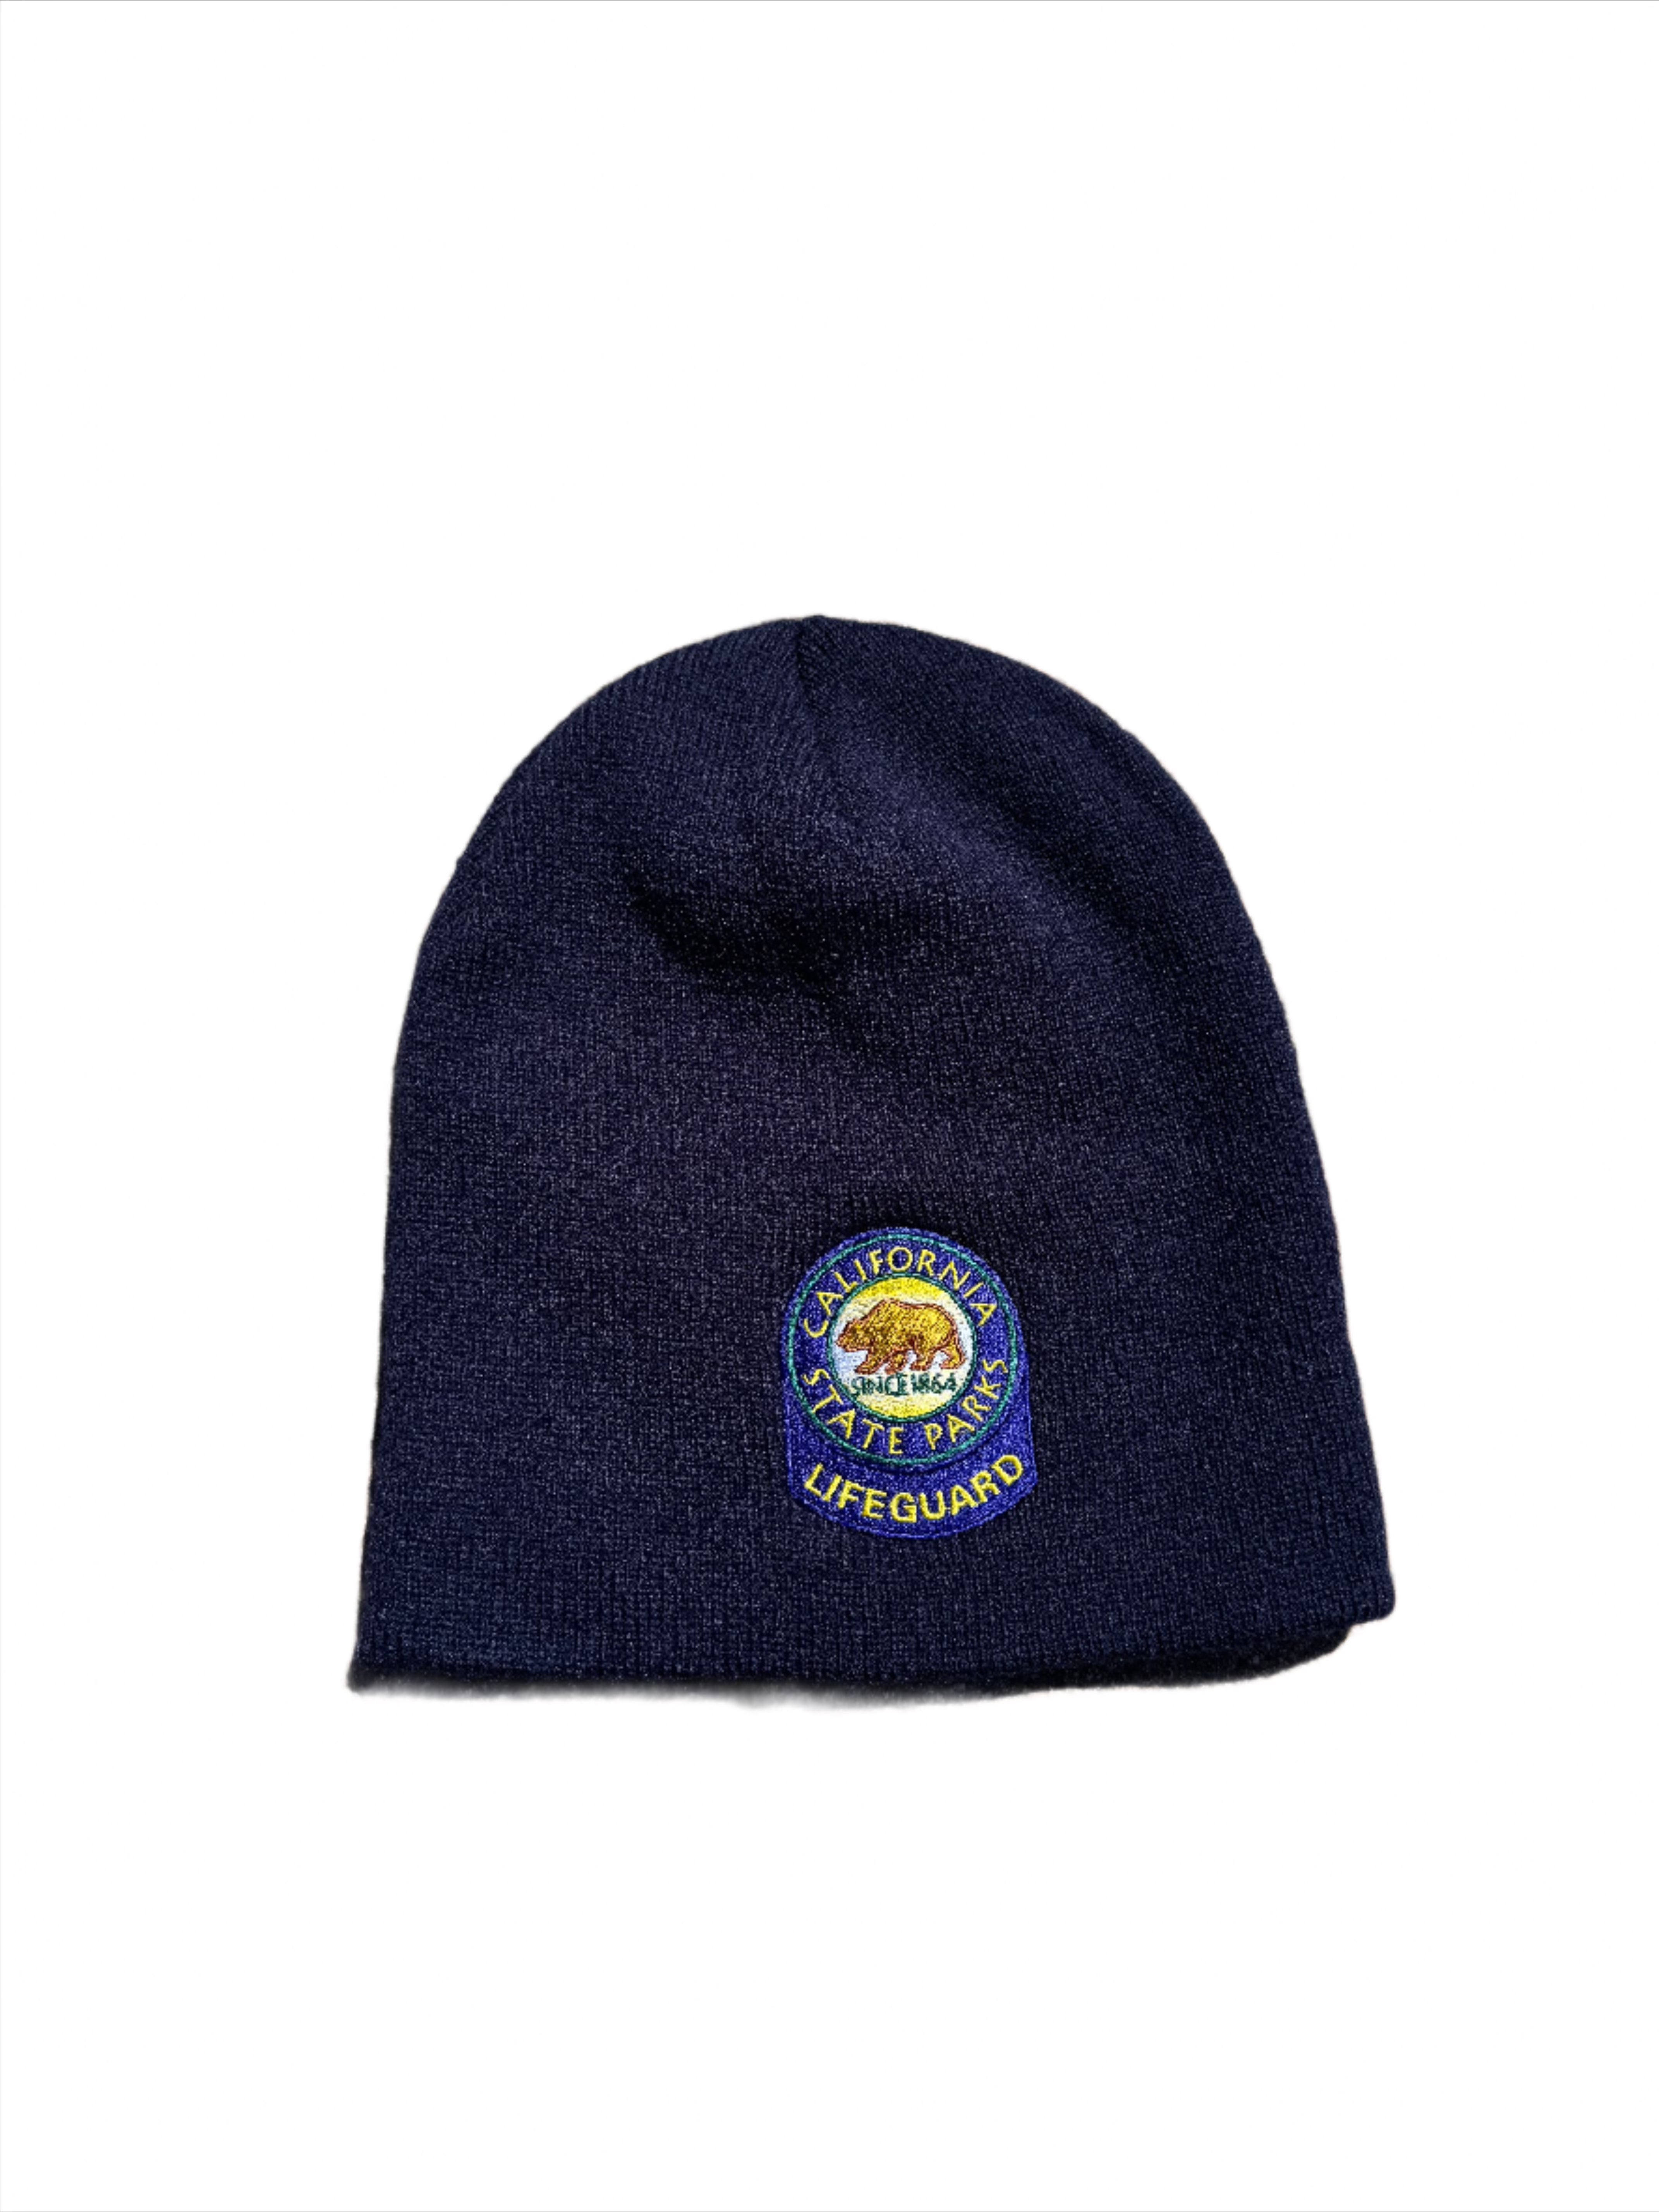 CA STATE PARKS Lifeguard Beanie